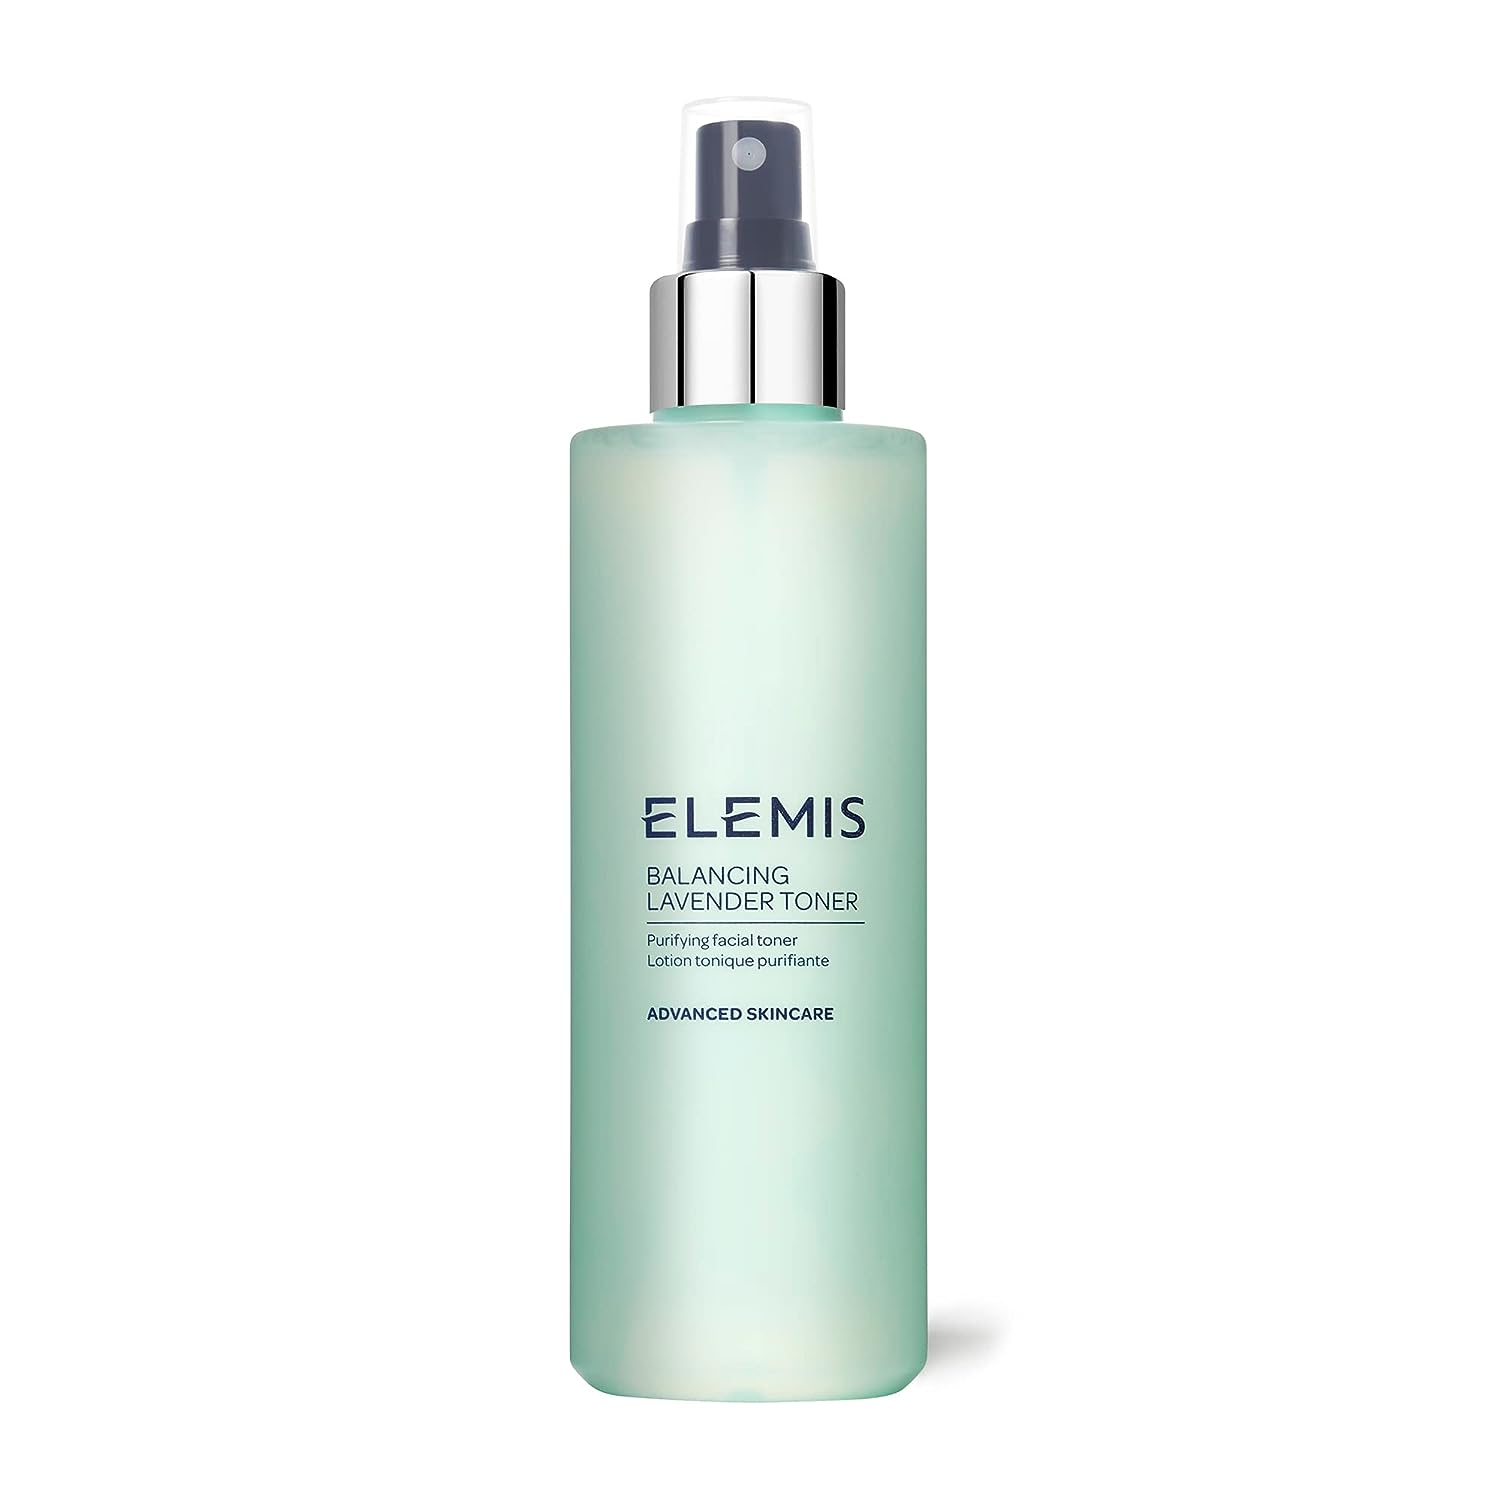 ELEMIS Balancing Toner | Alcohol-Free Purifying Facial Treatment Gently Softens, Soothes, and Refreshes for a Hydrated Complexion | 200